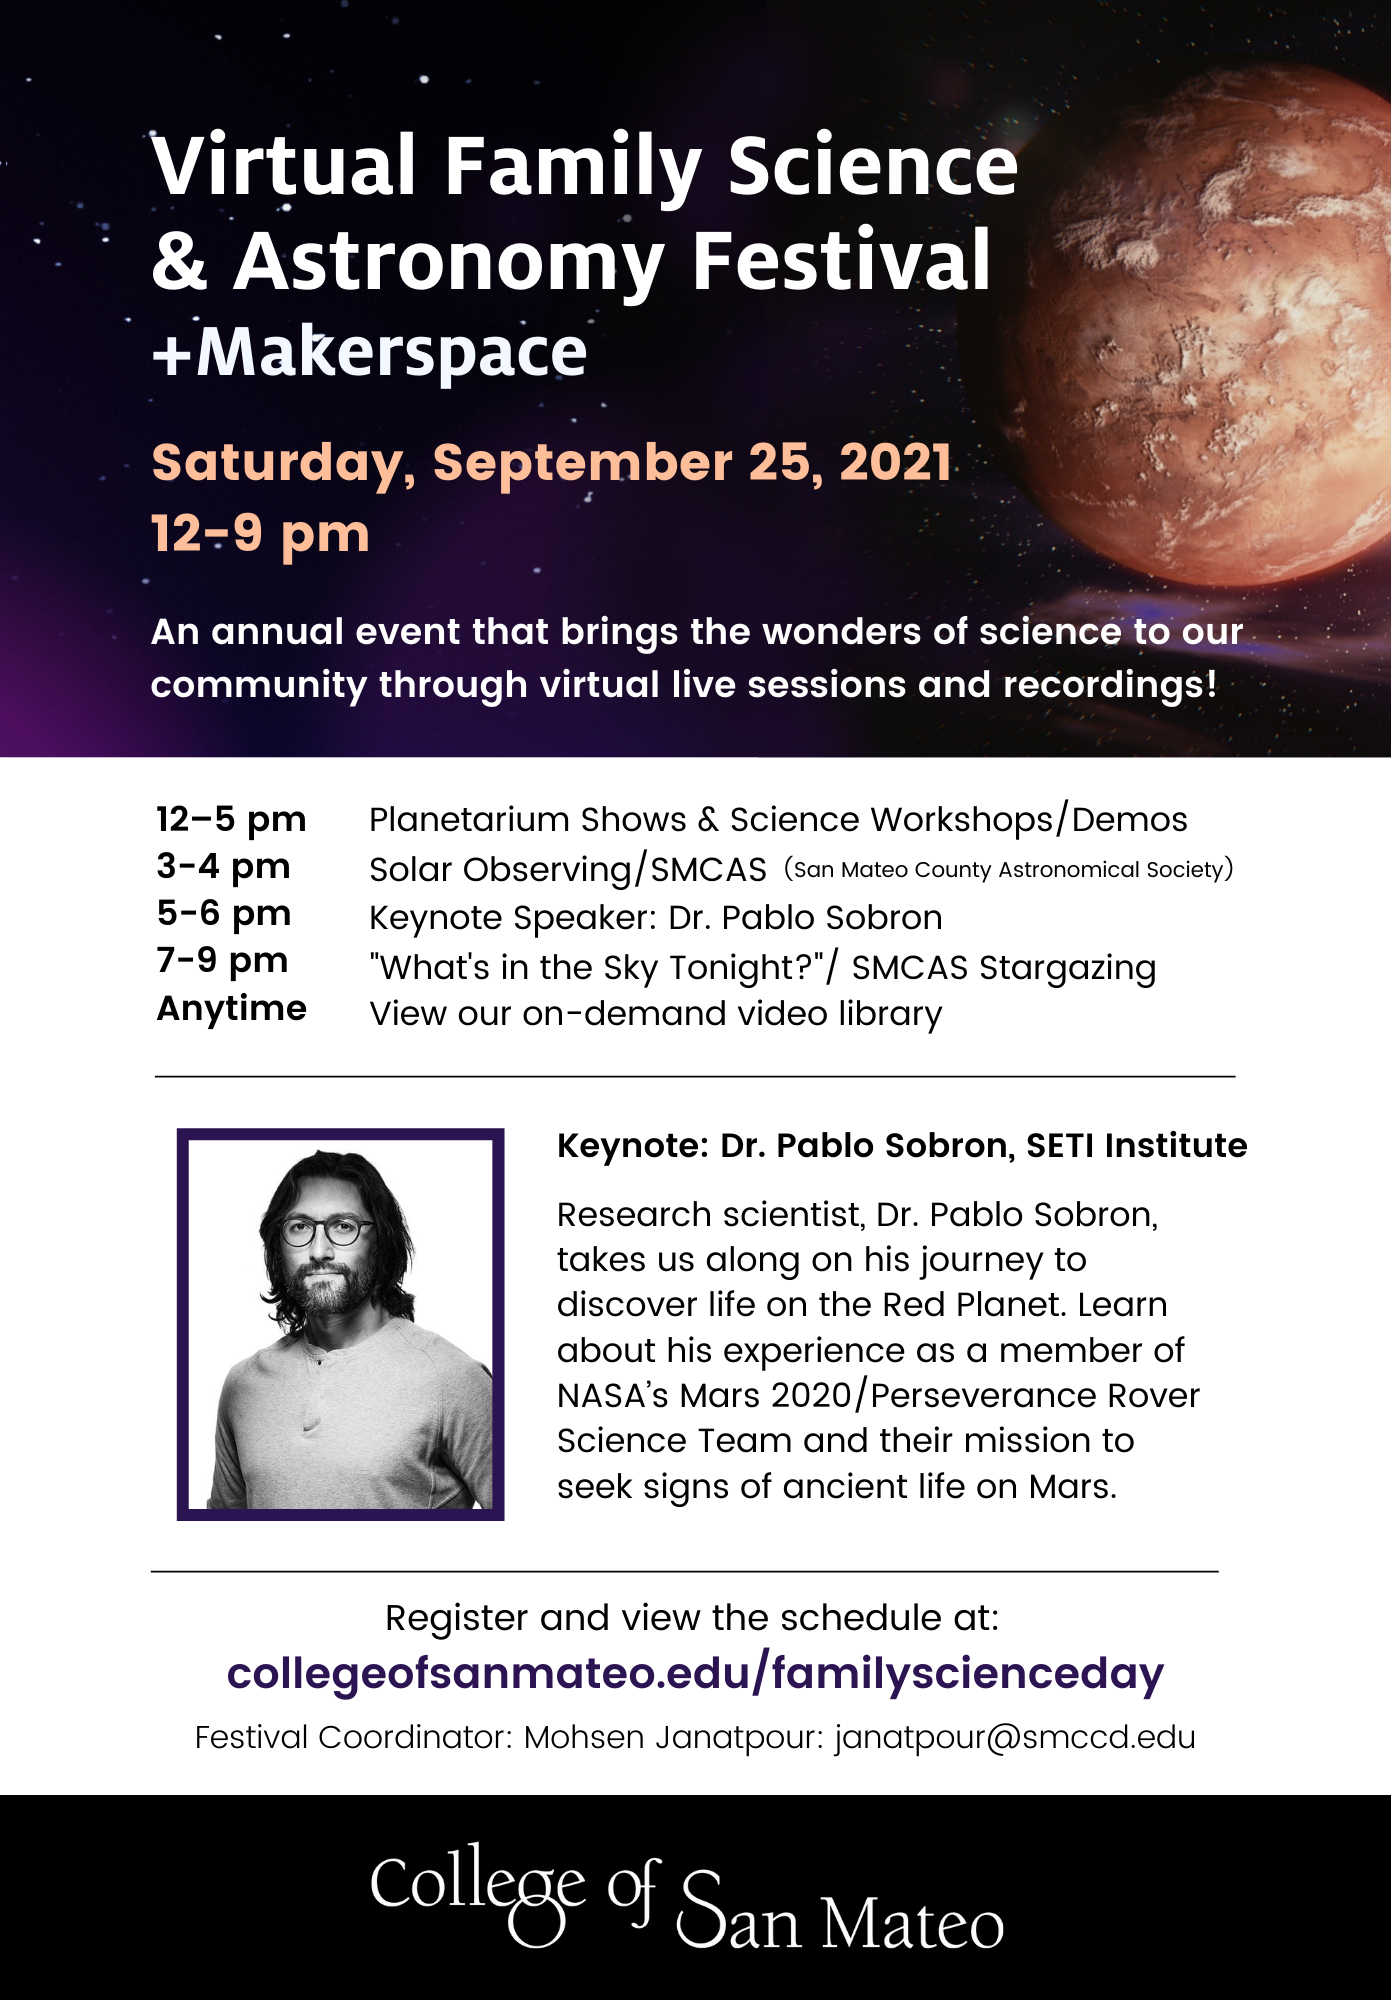 Virtual Family Science & Astronomy Festival + Makerspace Flier